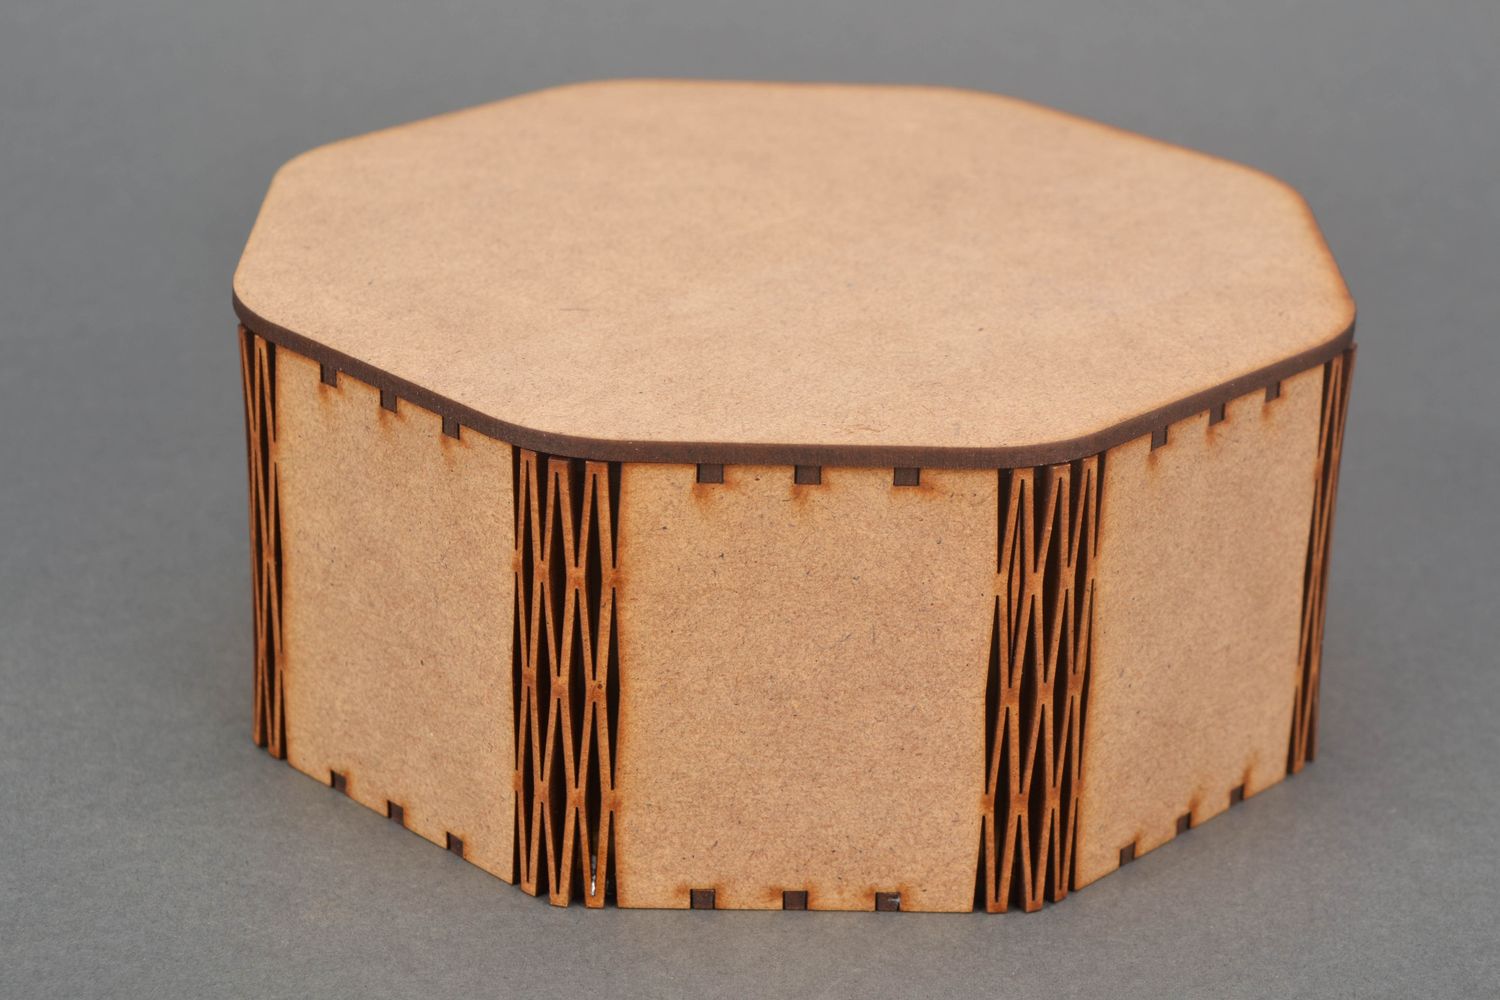 Plywood craft blank for octagonal jewelry box photo 3